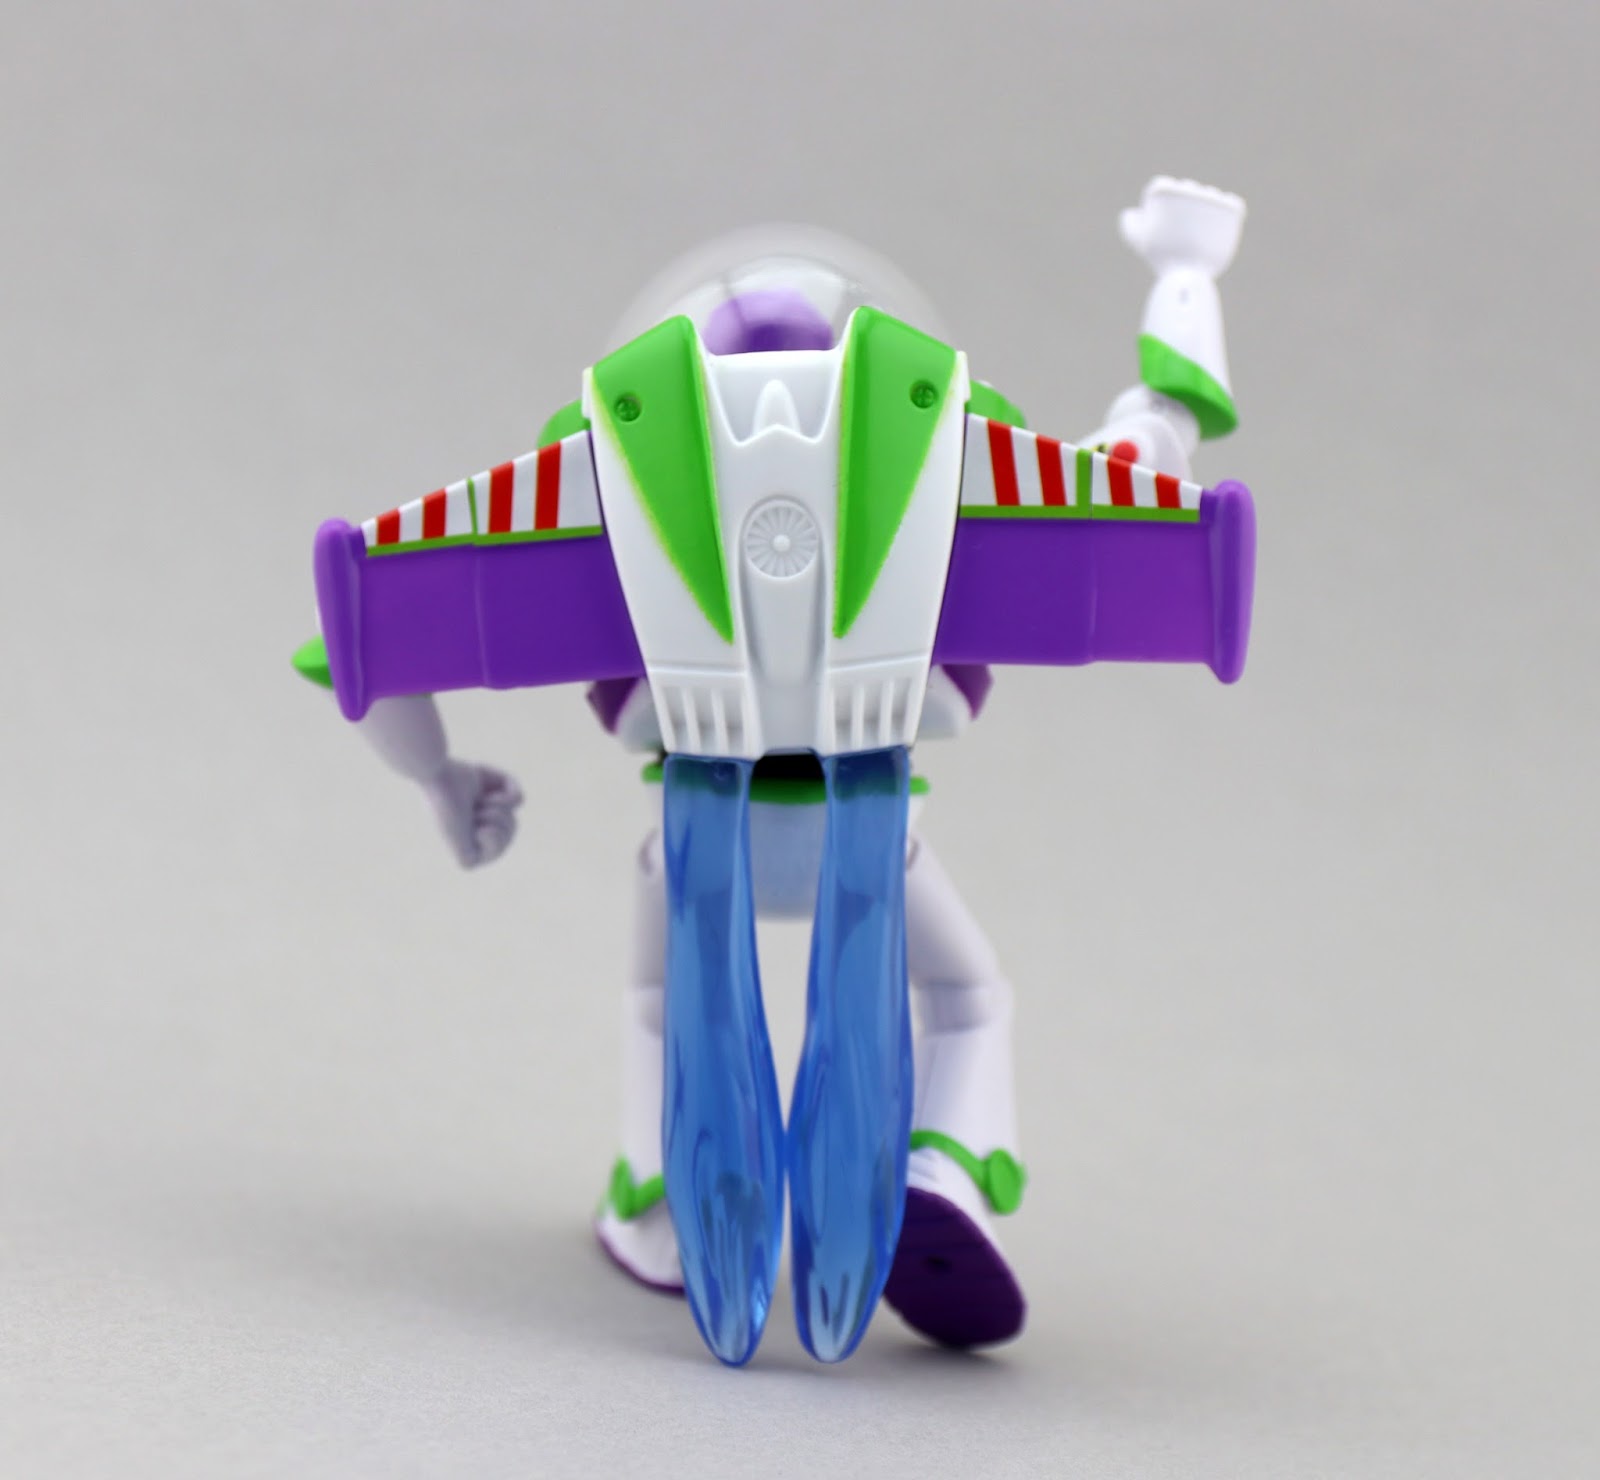 toy story blue flame buzz figure 